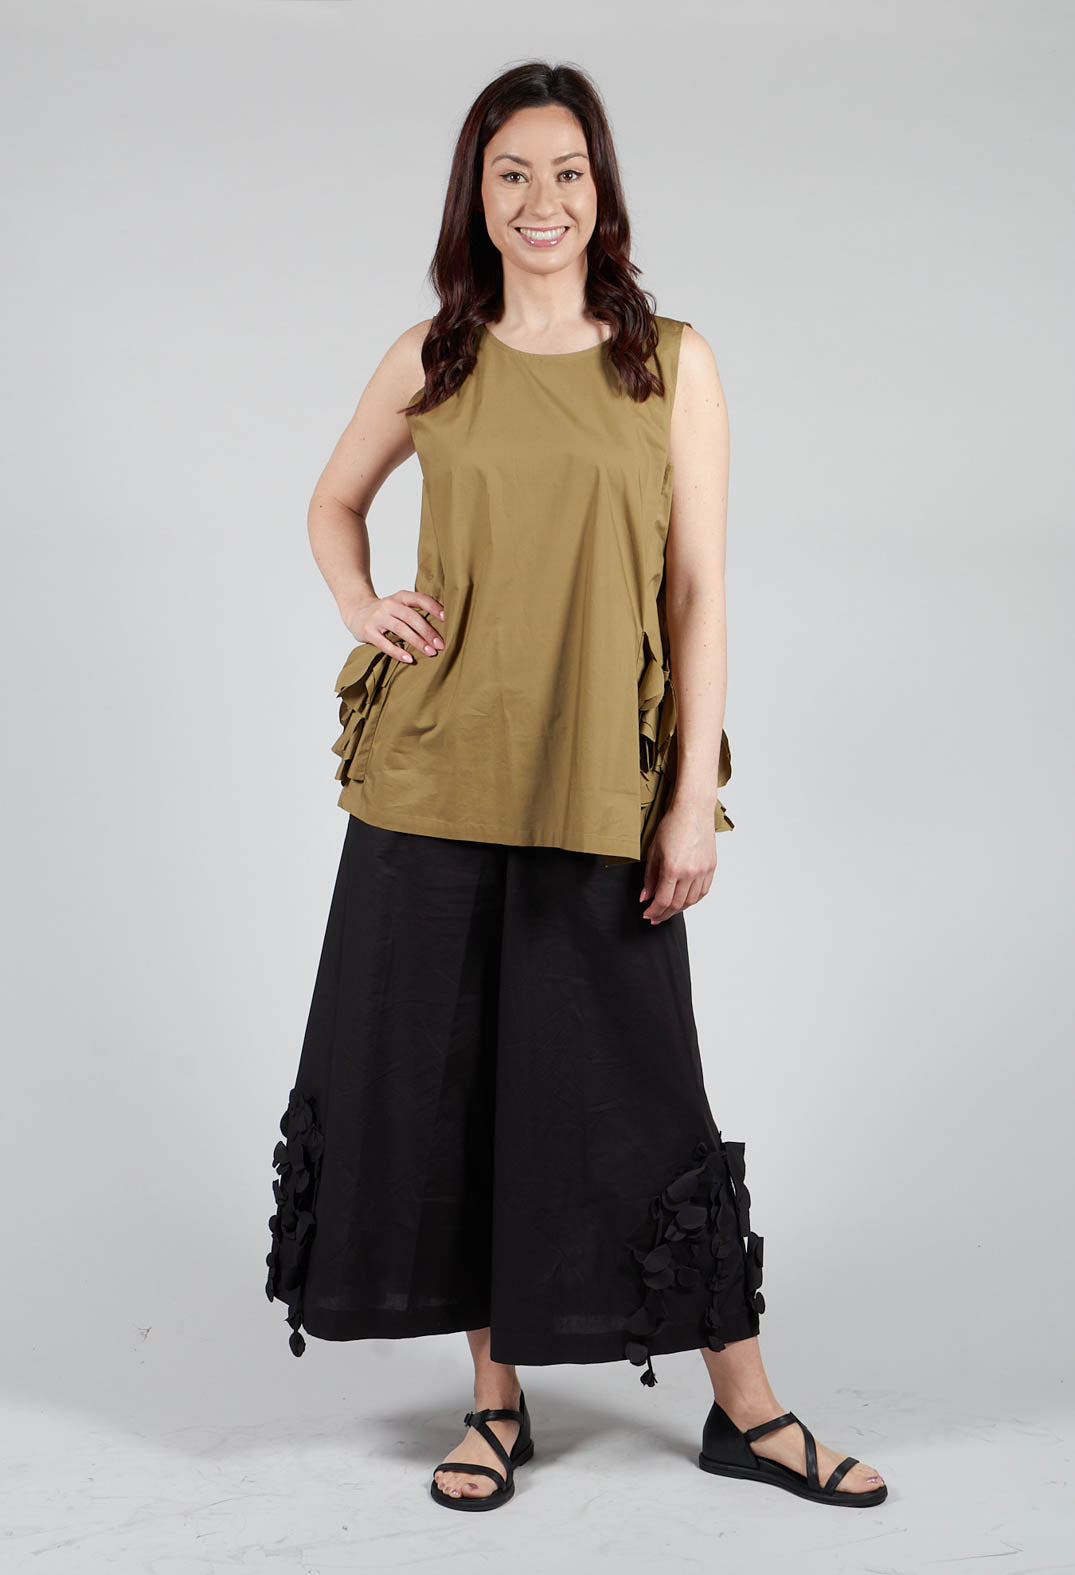 Sleeveless Top with Side Frill Feature in Avocado